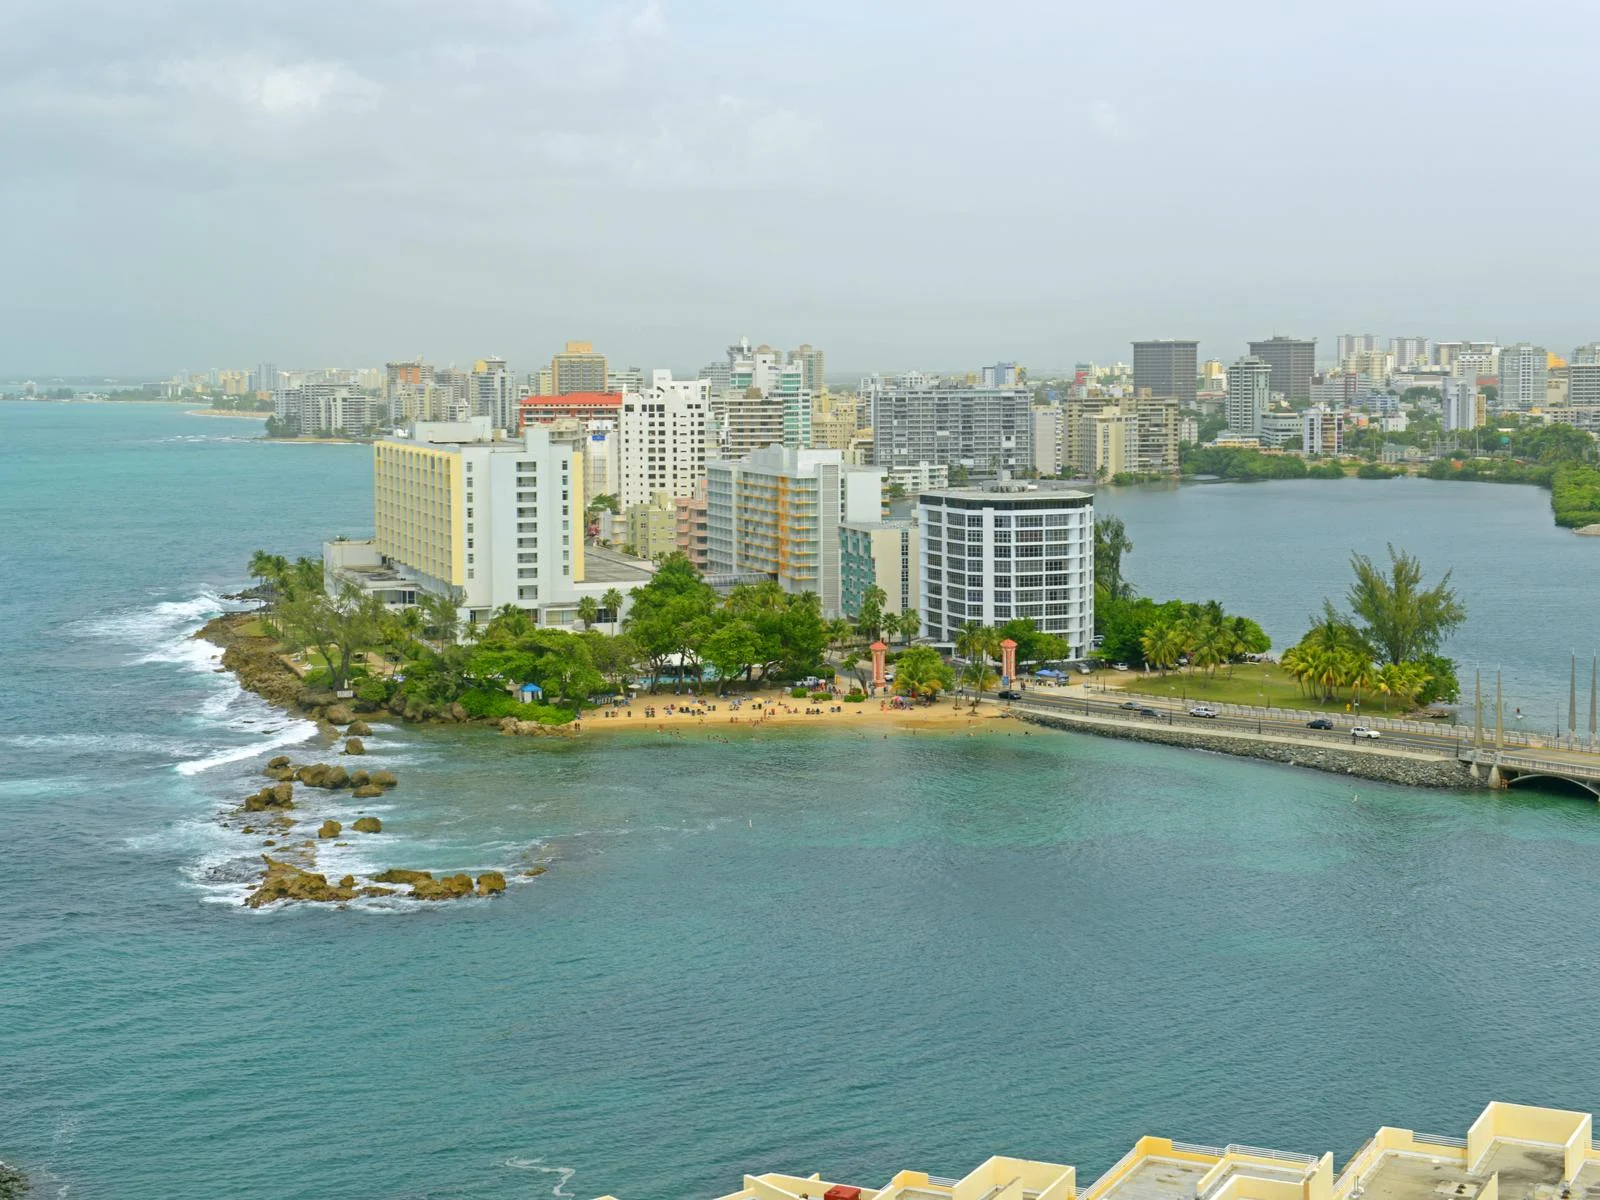 Aerial view of the small islet filled with structures in Condado District, an upper-class community in Old San Juan, Santurce, one of the best places to visit in Puerto Rico